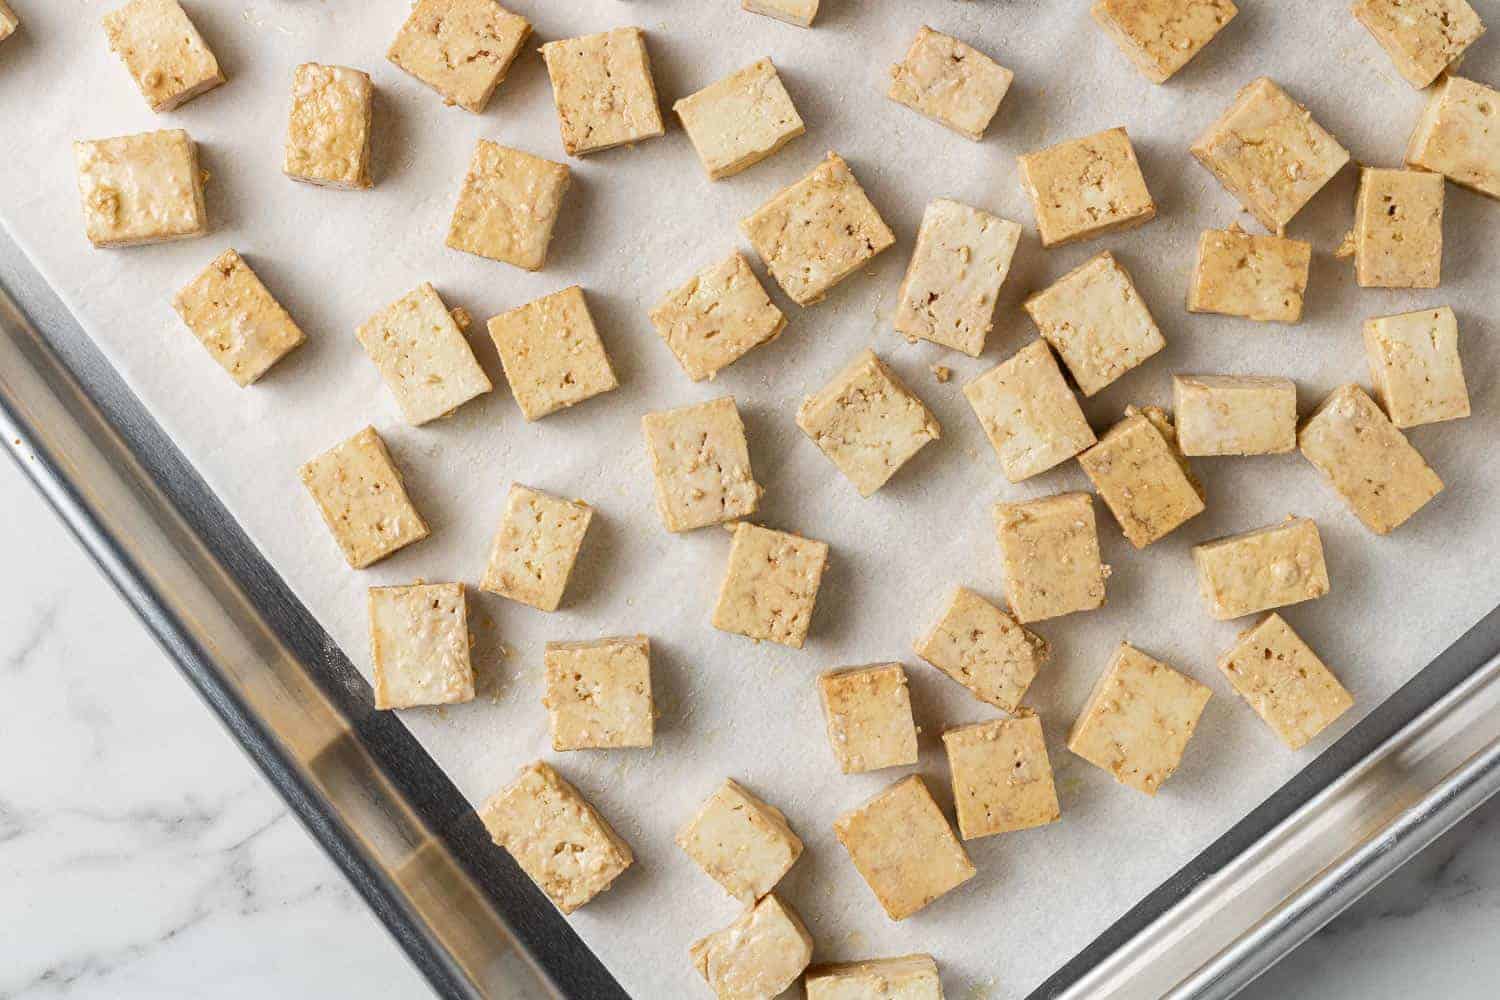 Unbaked tofu on a parchment paper lined baking sheet.